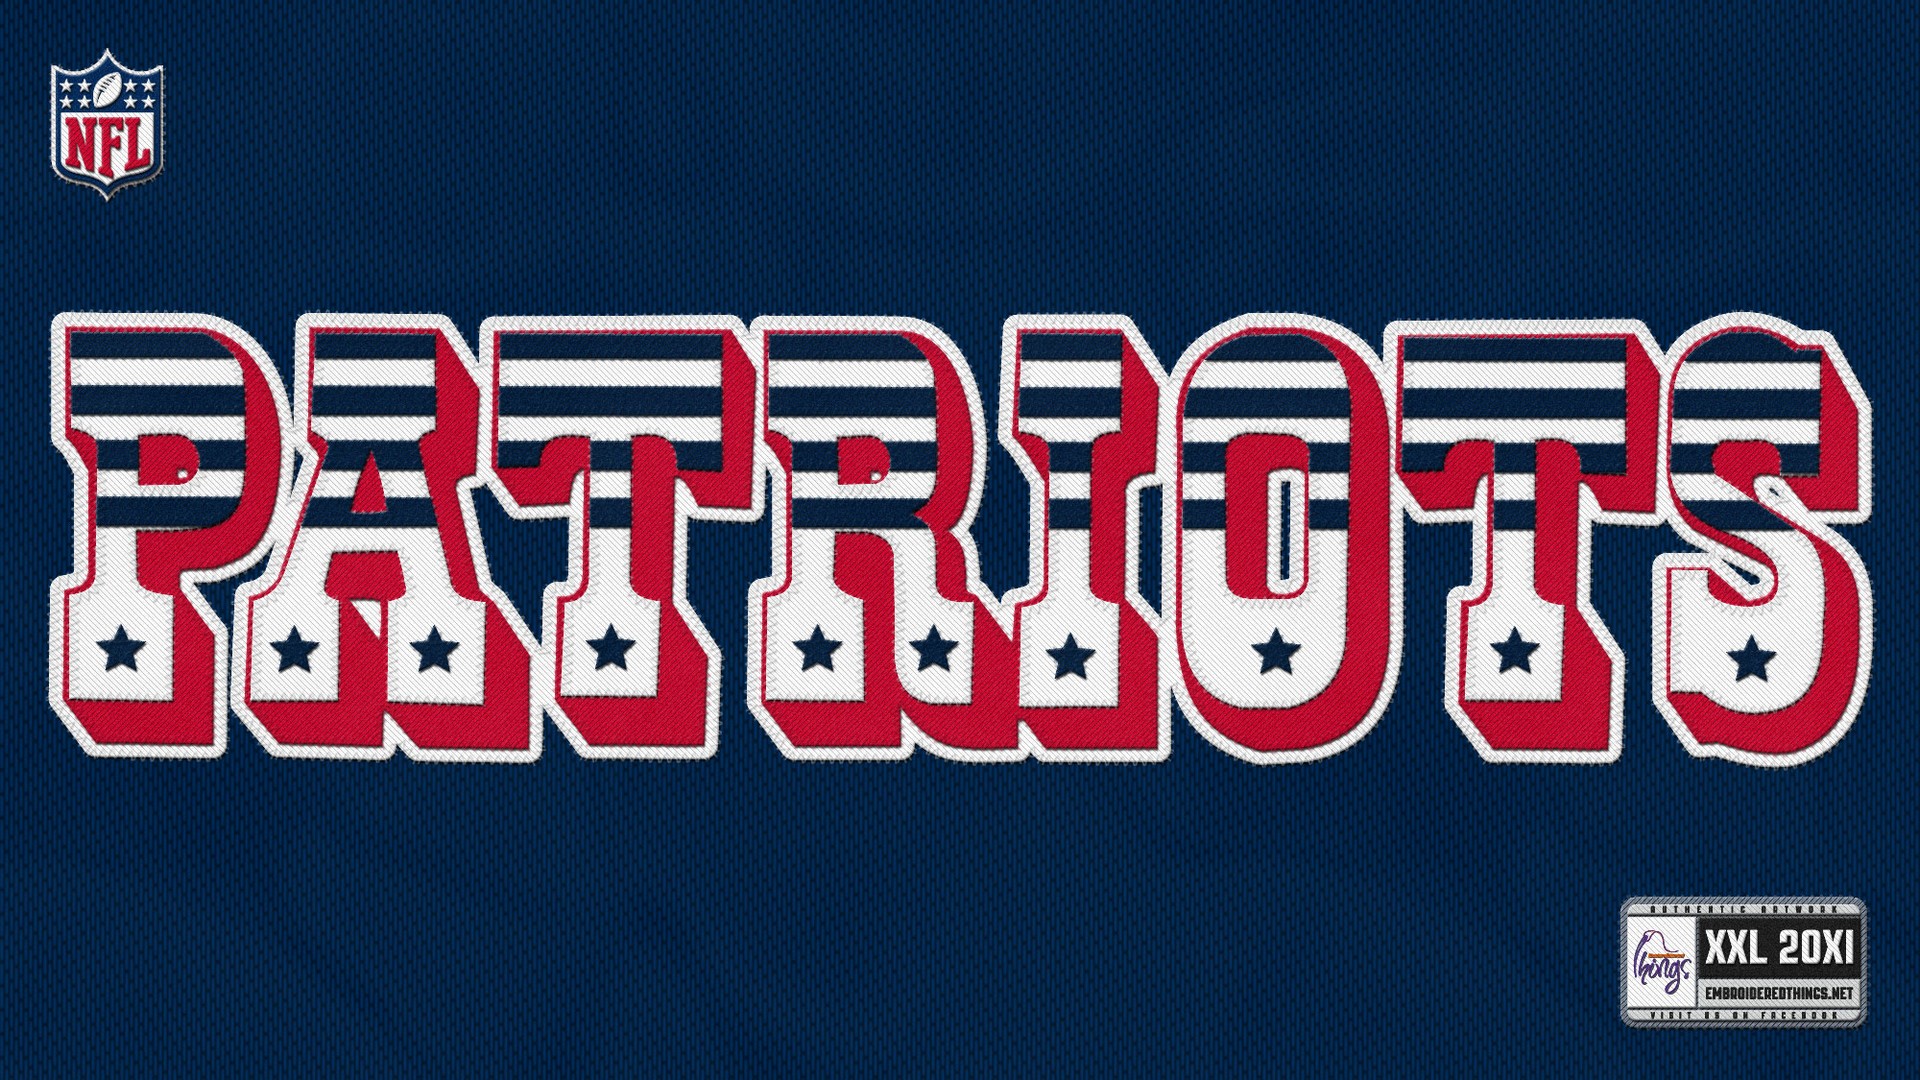 Wallpapers Patriots with resolution 1920x1080 pixel. You can make this wallpaper for your Mac or Windows Desktop Background, iPhone, Android or Tablet and another Smartphone device